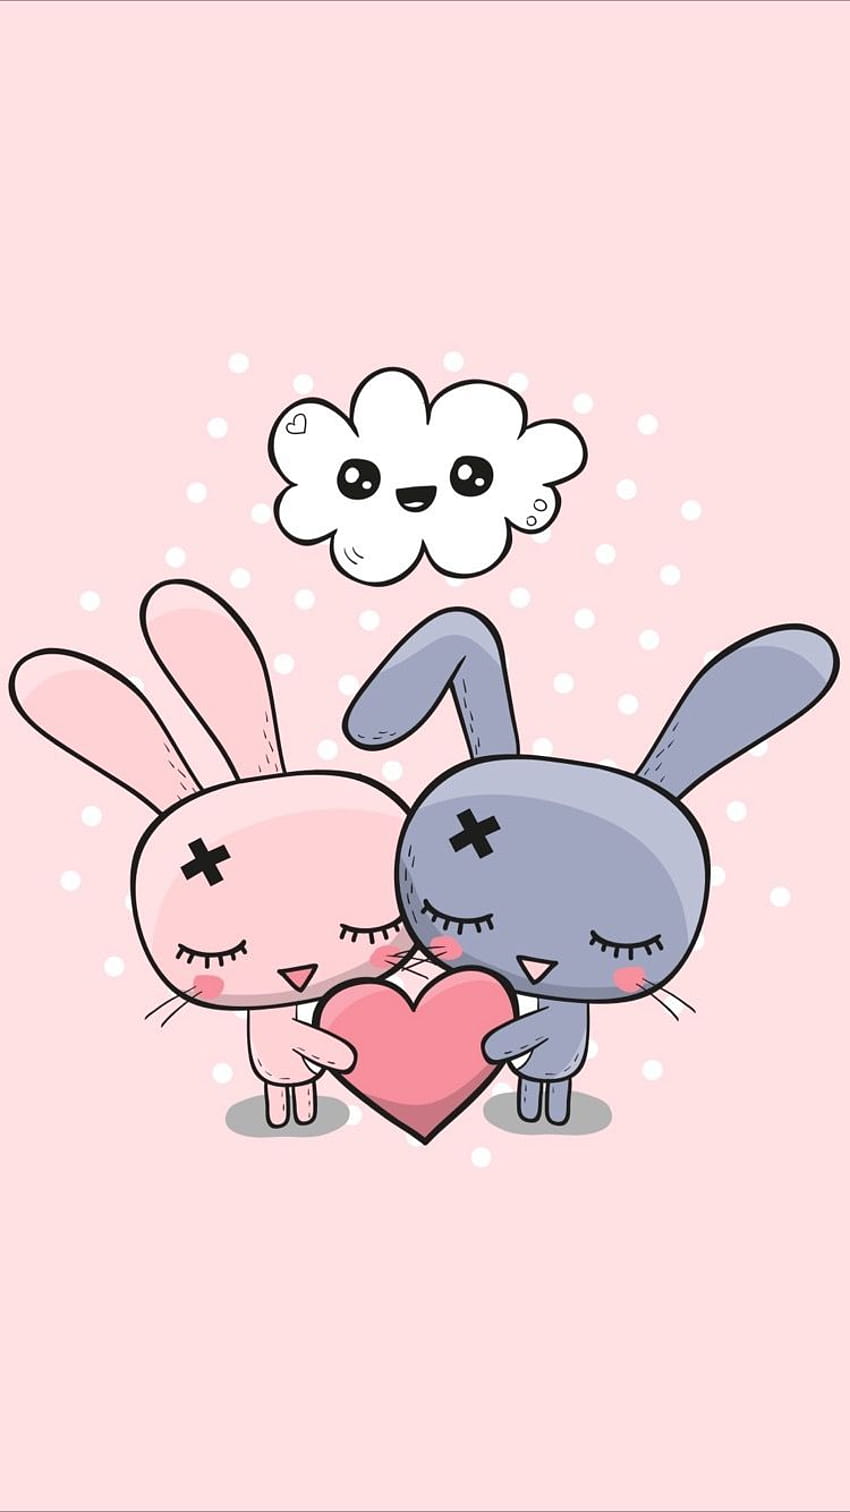 Tap to get app! ⬆️ Cute love bunnies for your iPhone 8 from Everpix app!, kawaii bunny iphone HD phone wallpaper